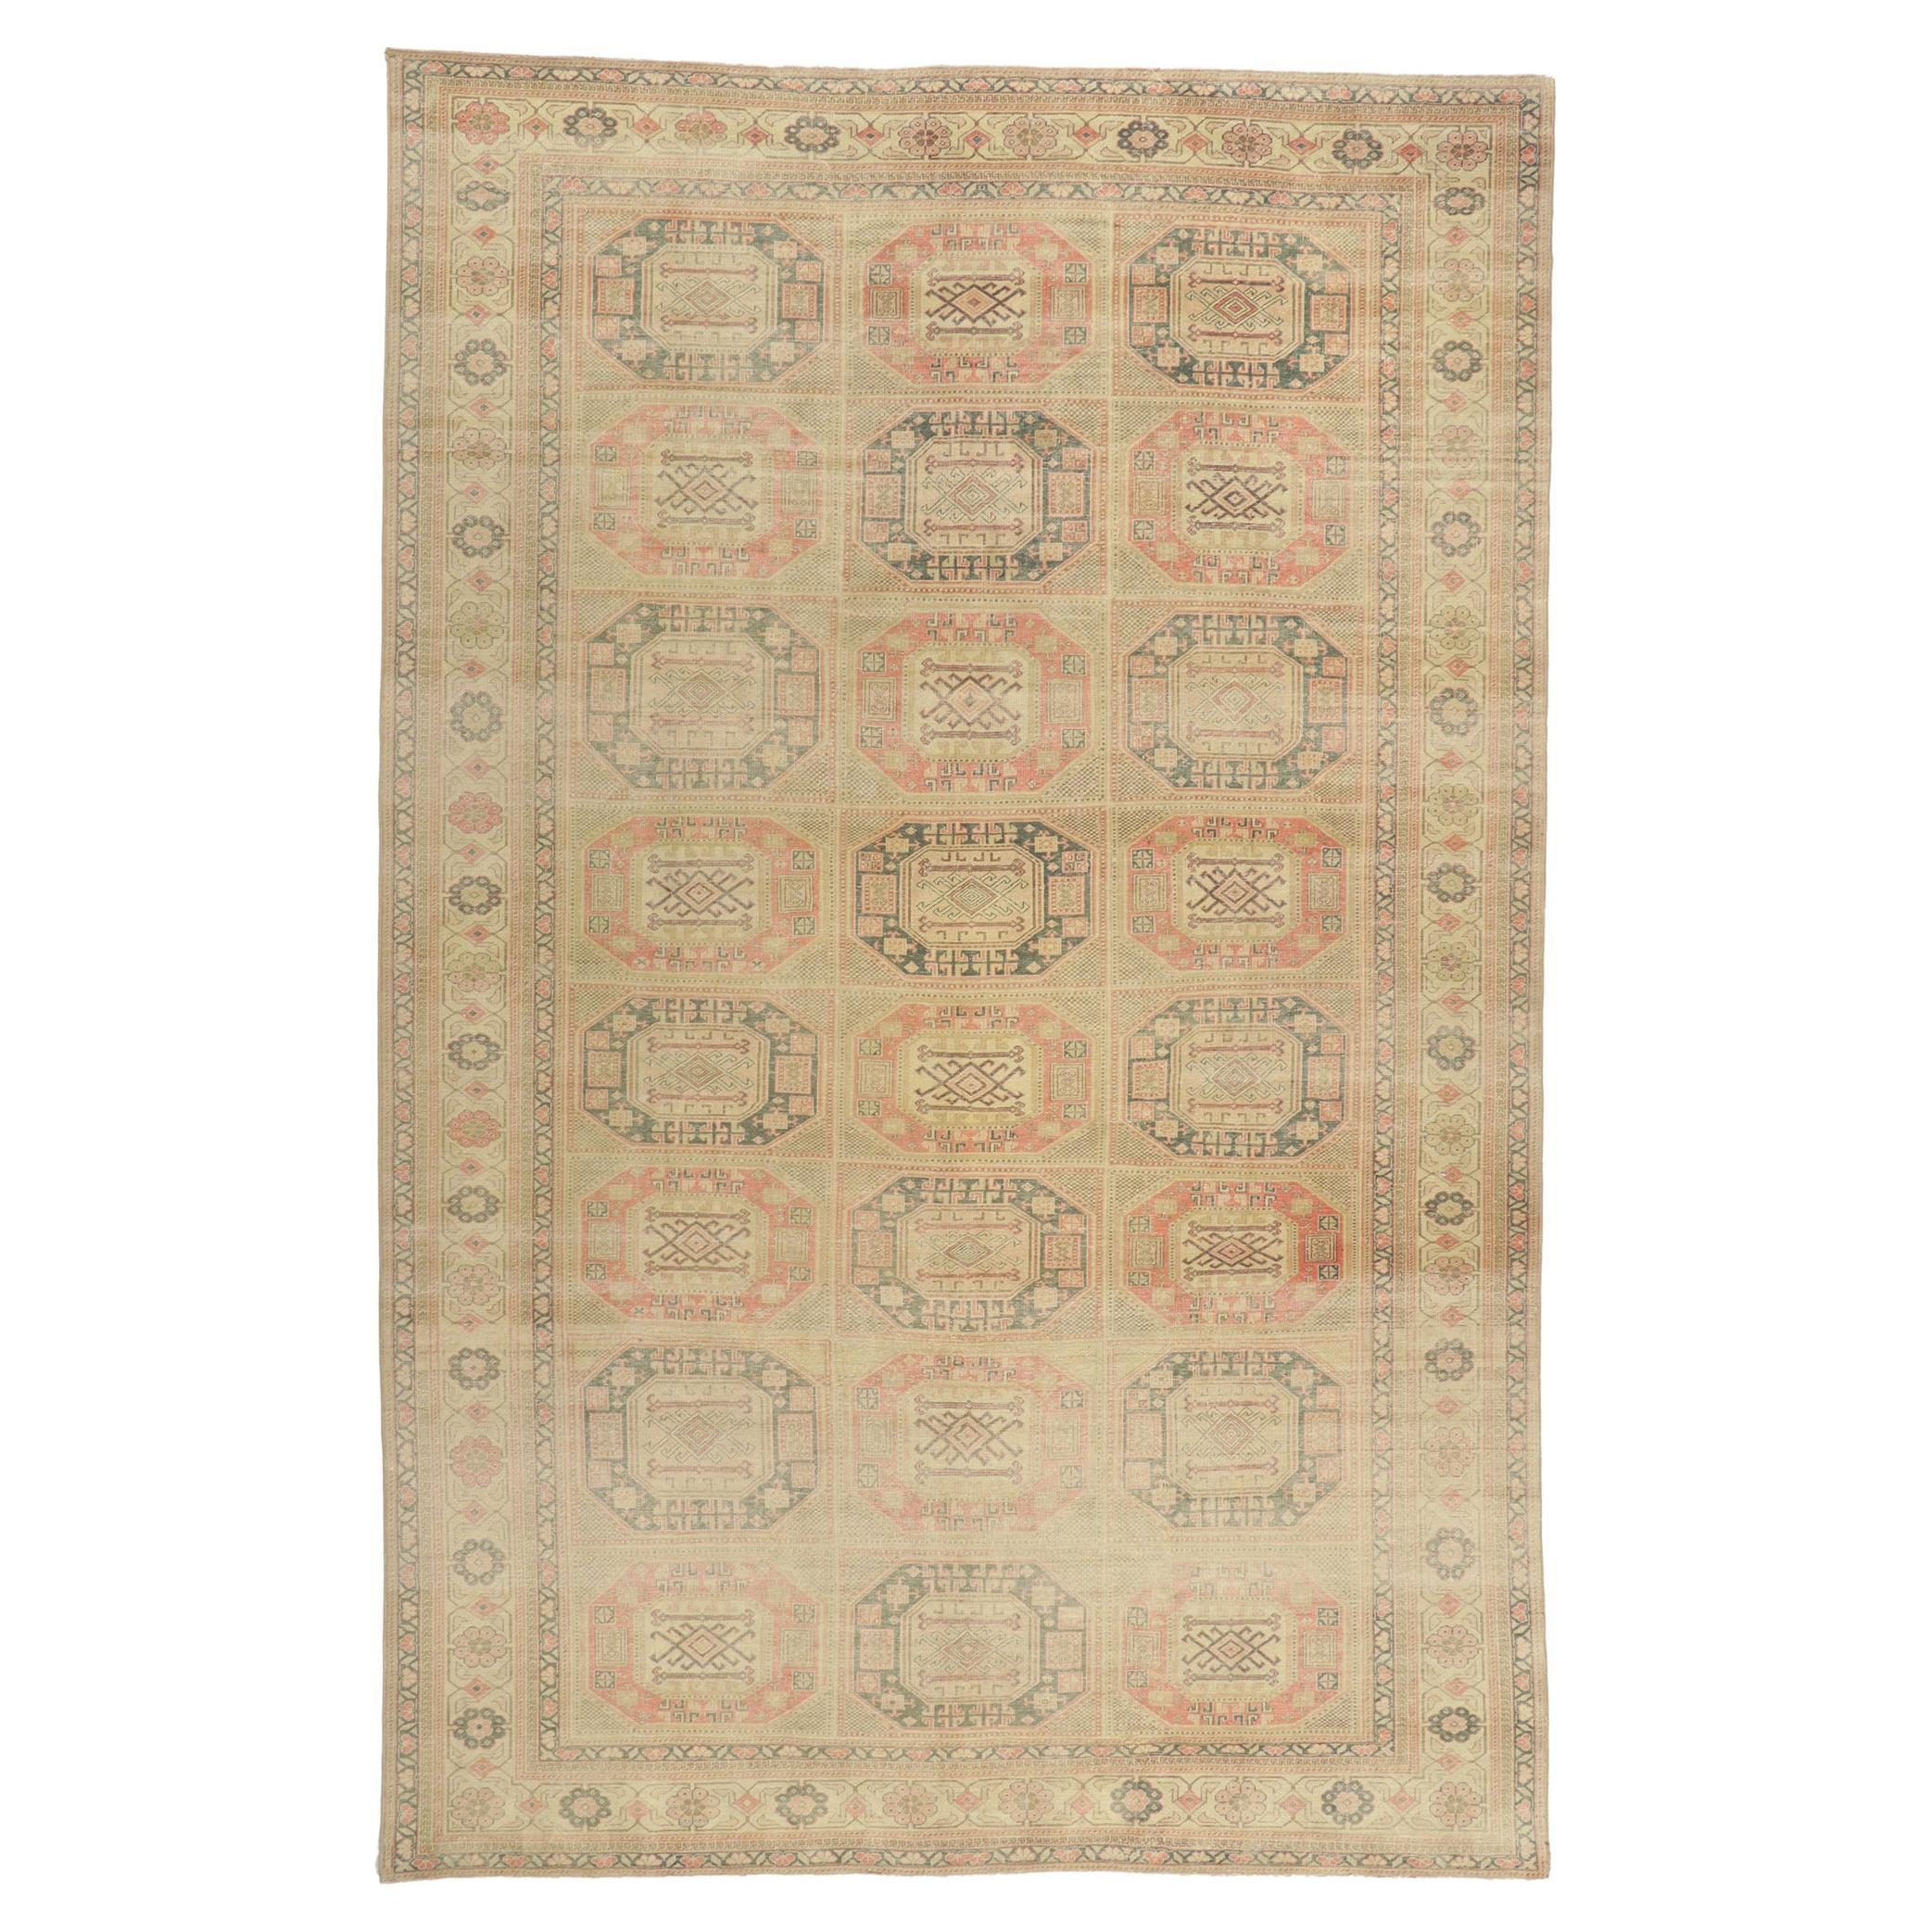 Rustic Vintage Turkish Sivas Rug with Faded Earth-Tone Colors